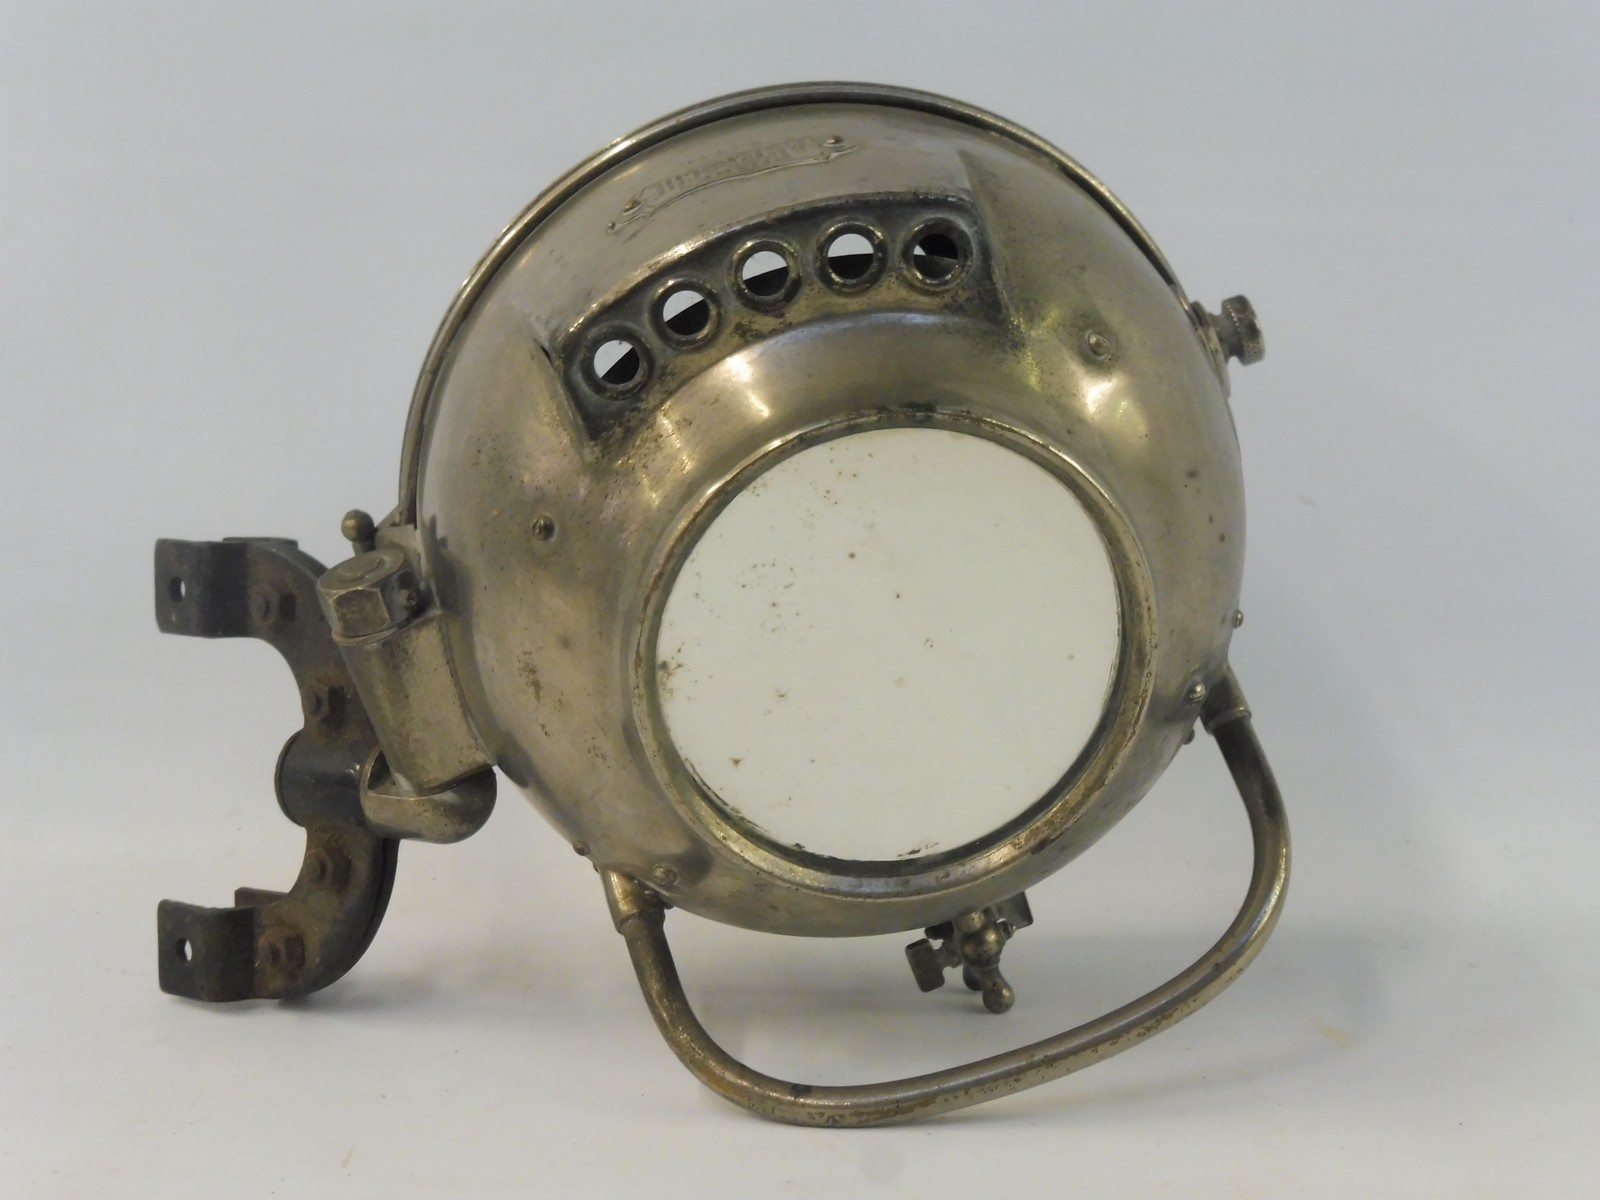 An early French nickel plated spot lamp marked Phares Auteroche Reflex. - Image 3 of 4